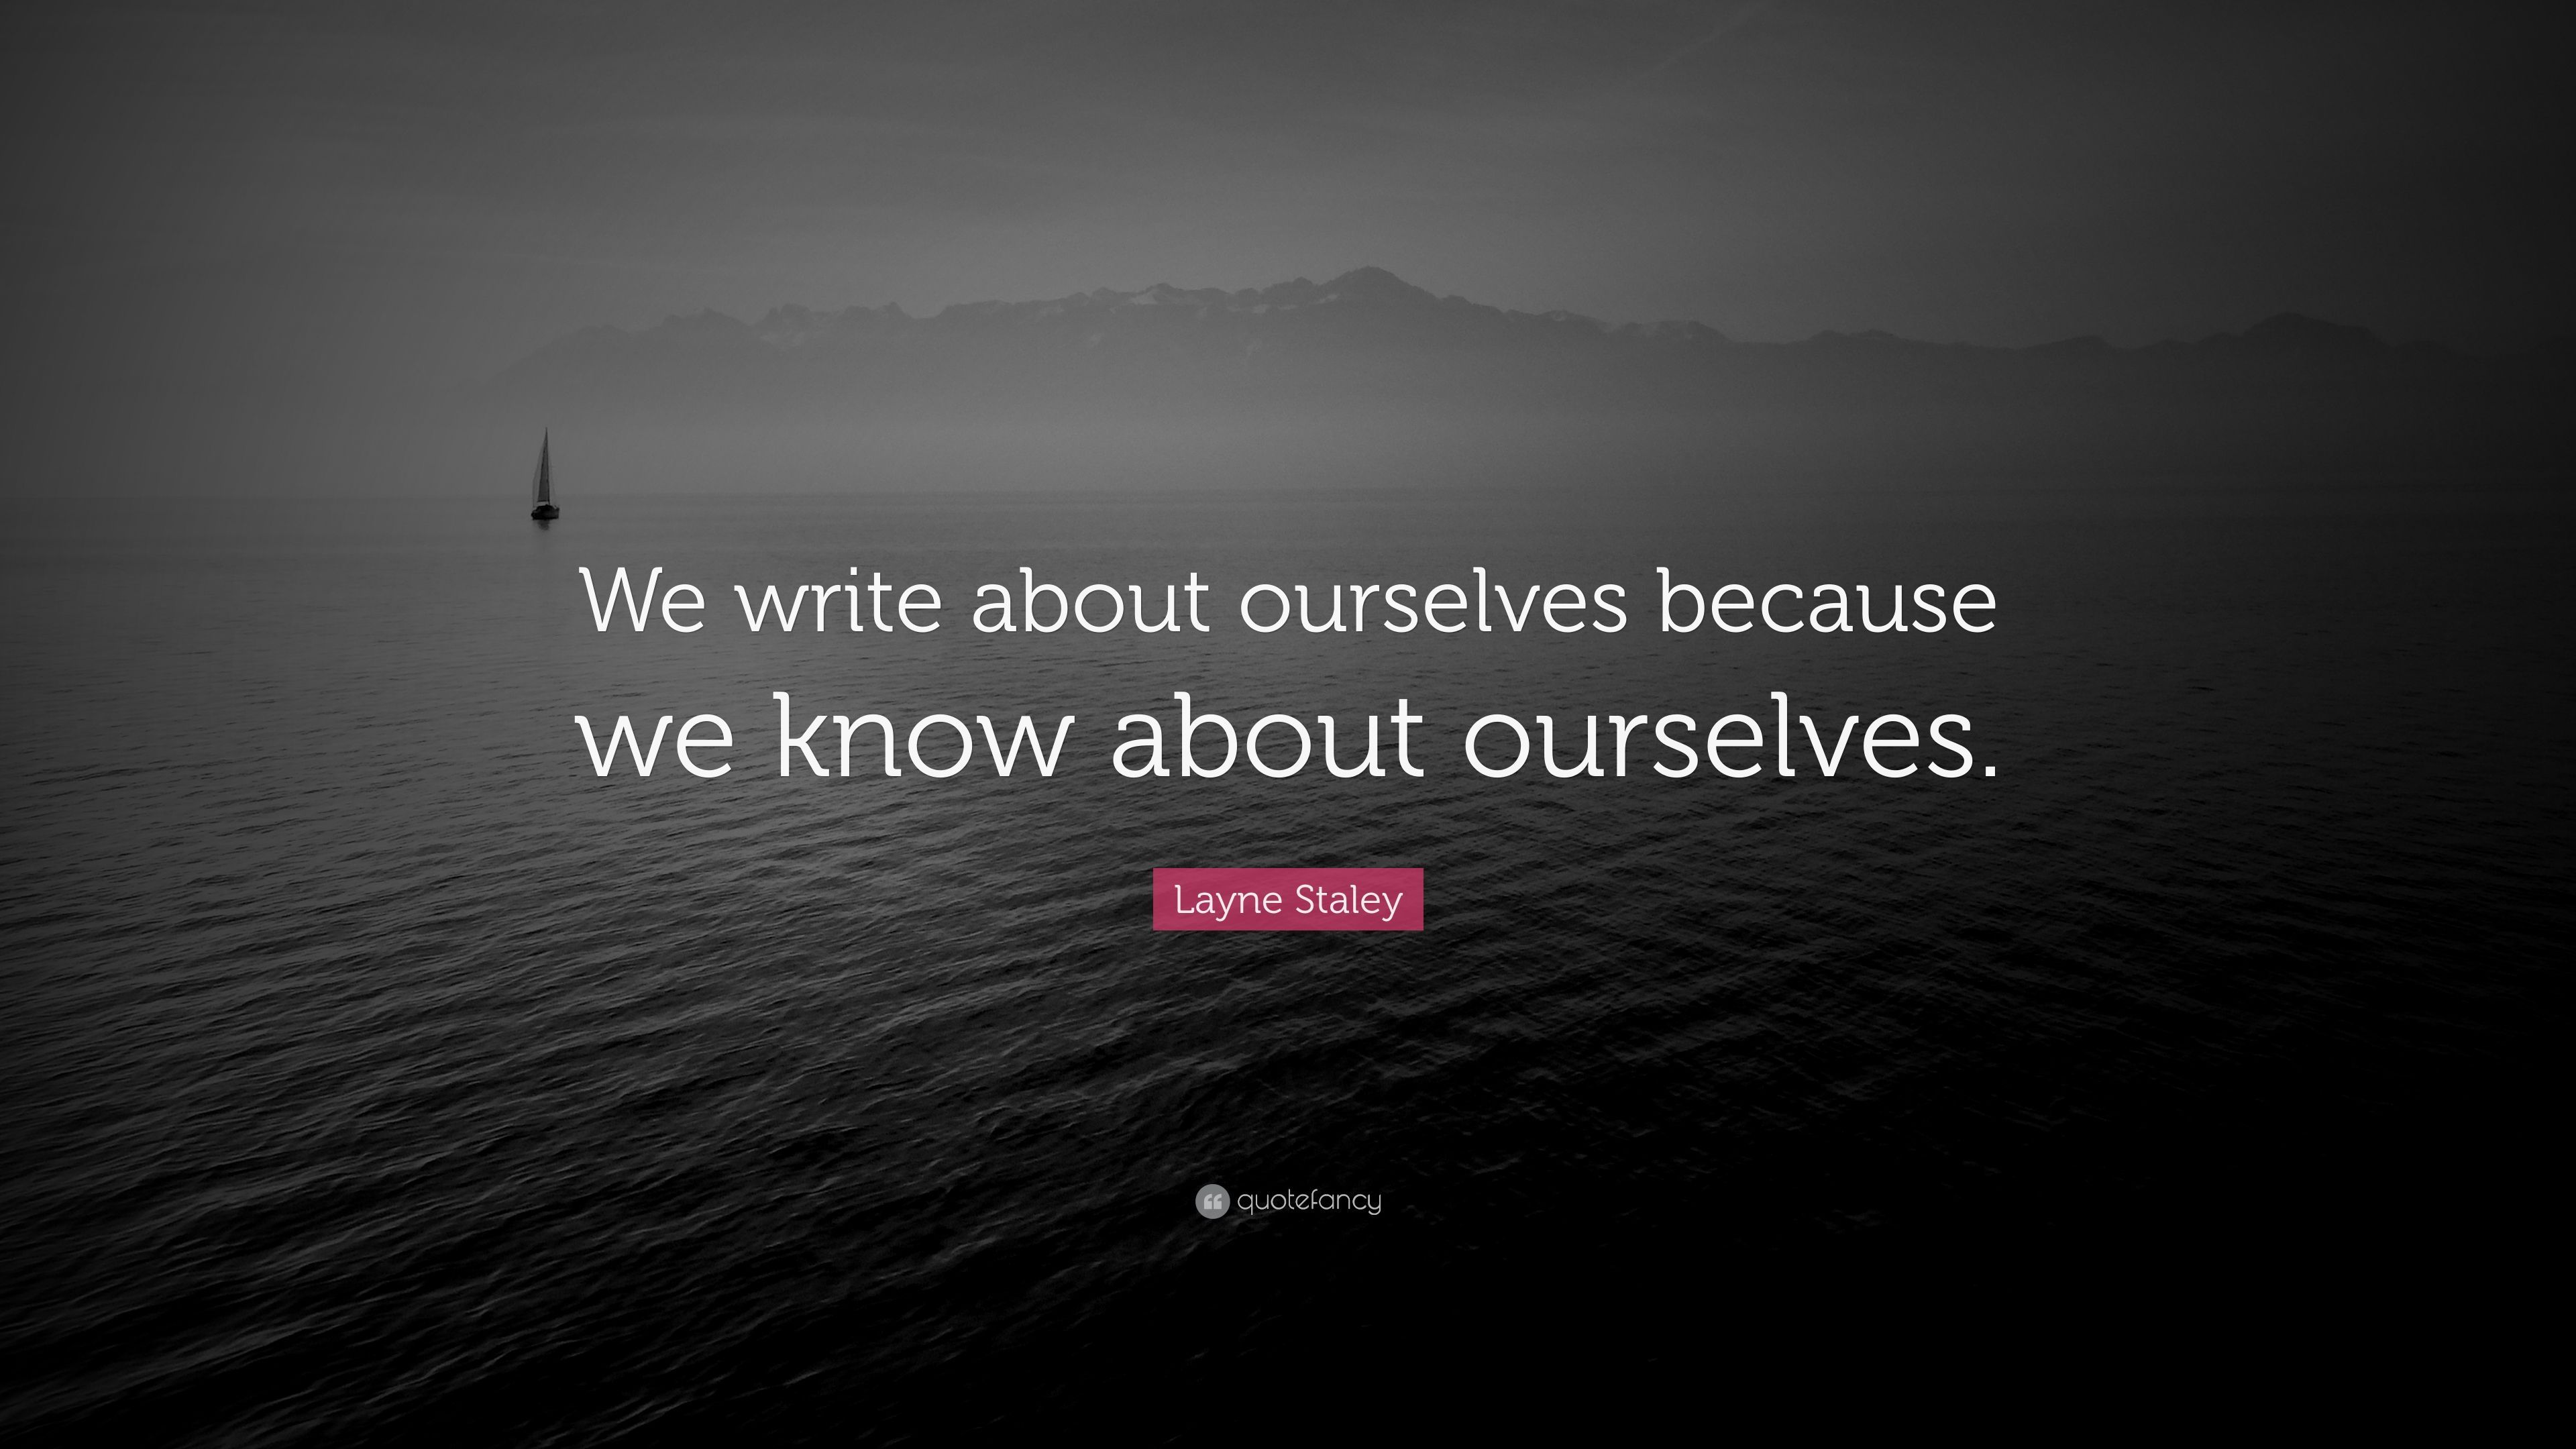 Layne Staley Quote: “We write about ourselves because we know about ourselves.” (7 wallpaper)